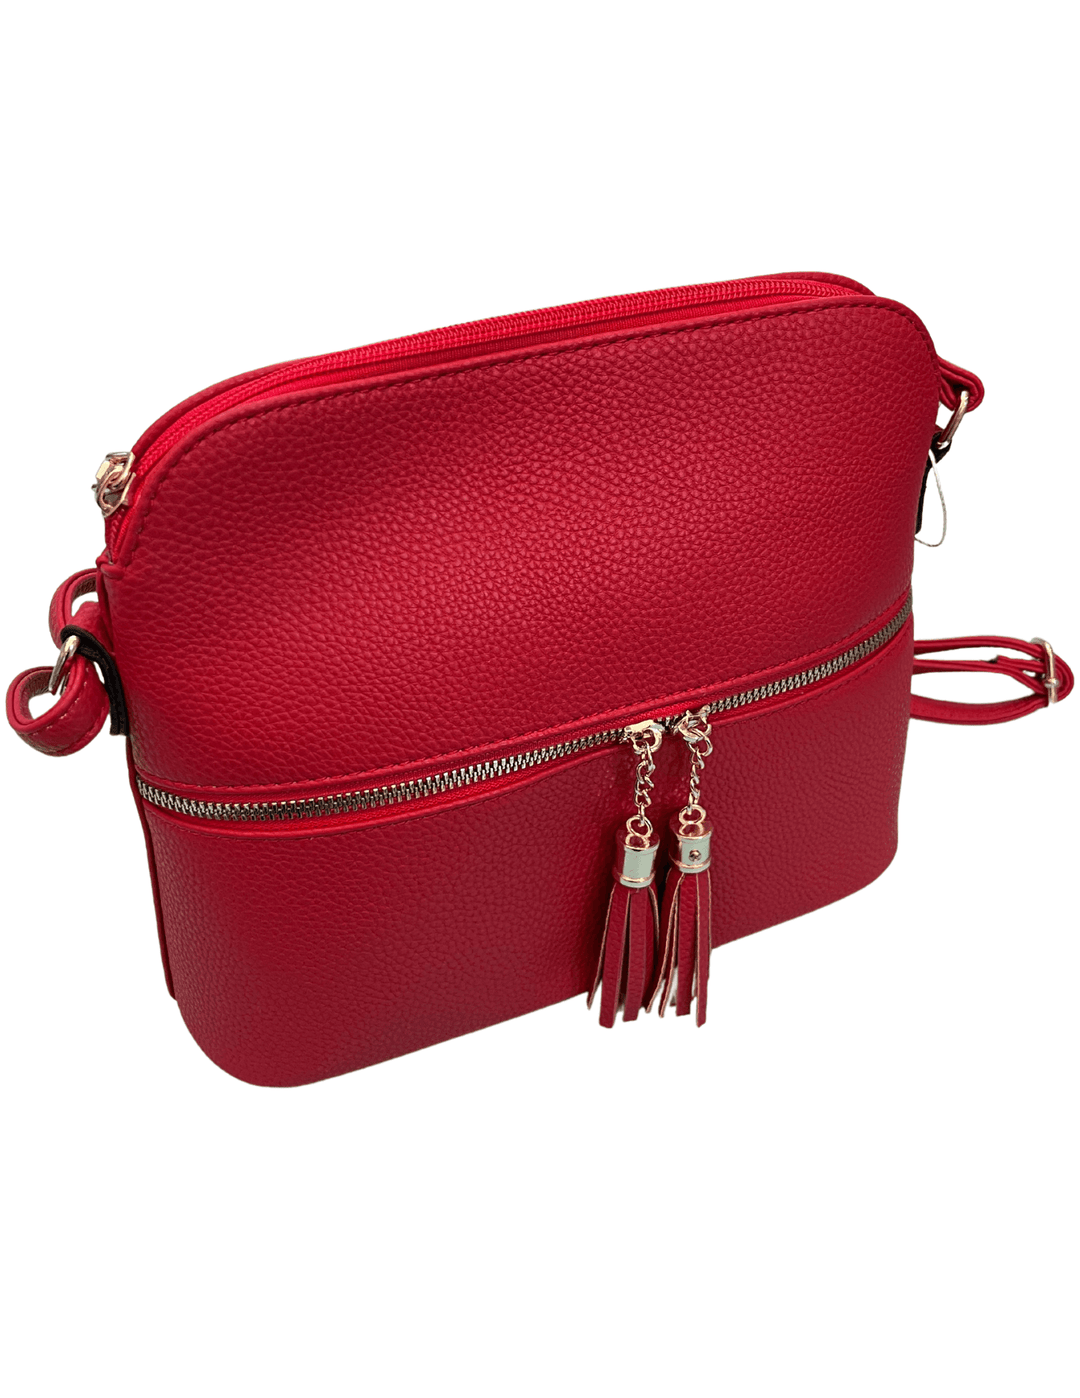 perfect fit every day roomy slim crossbody purse red